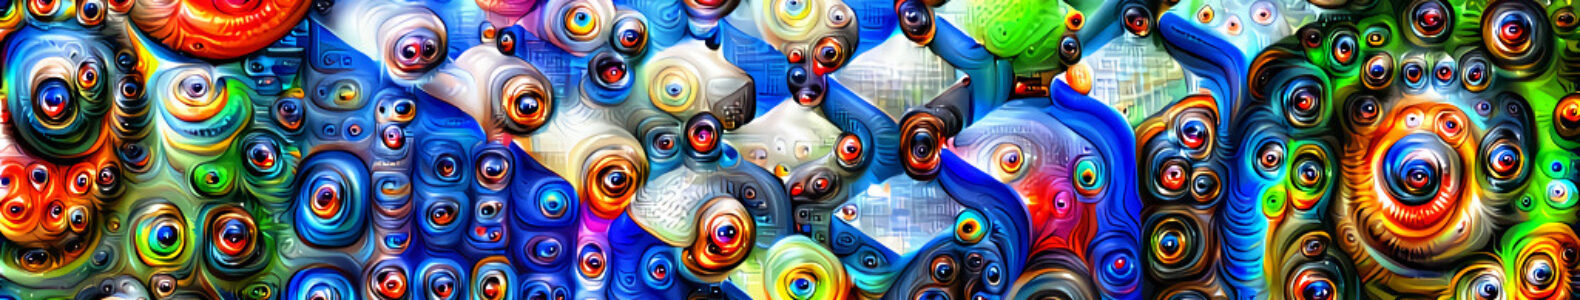 Real Painting with Deep Dream